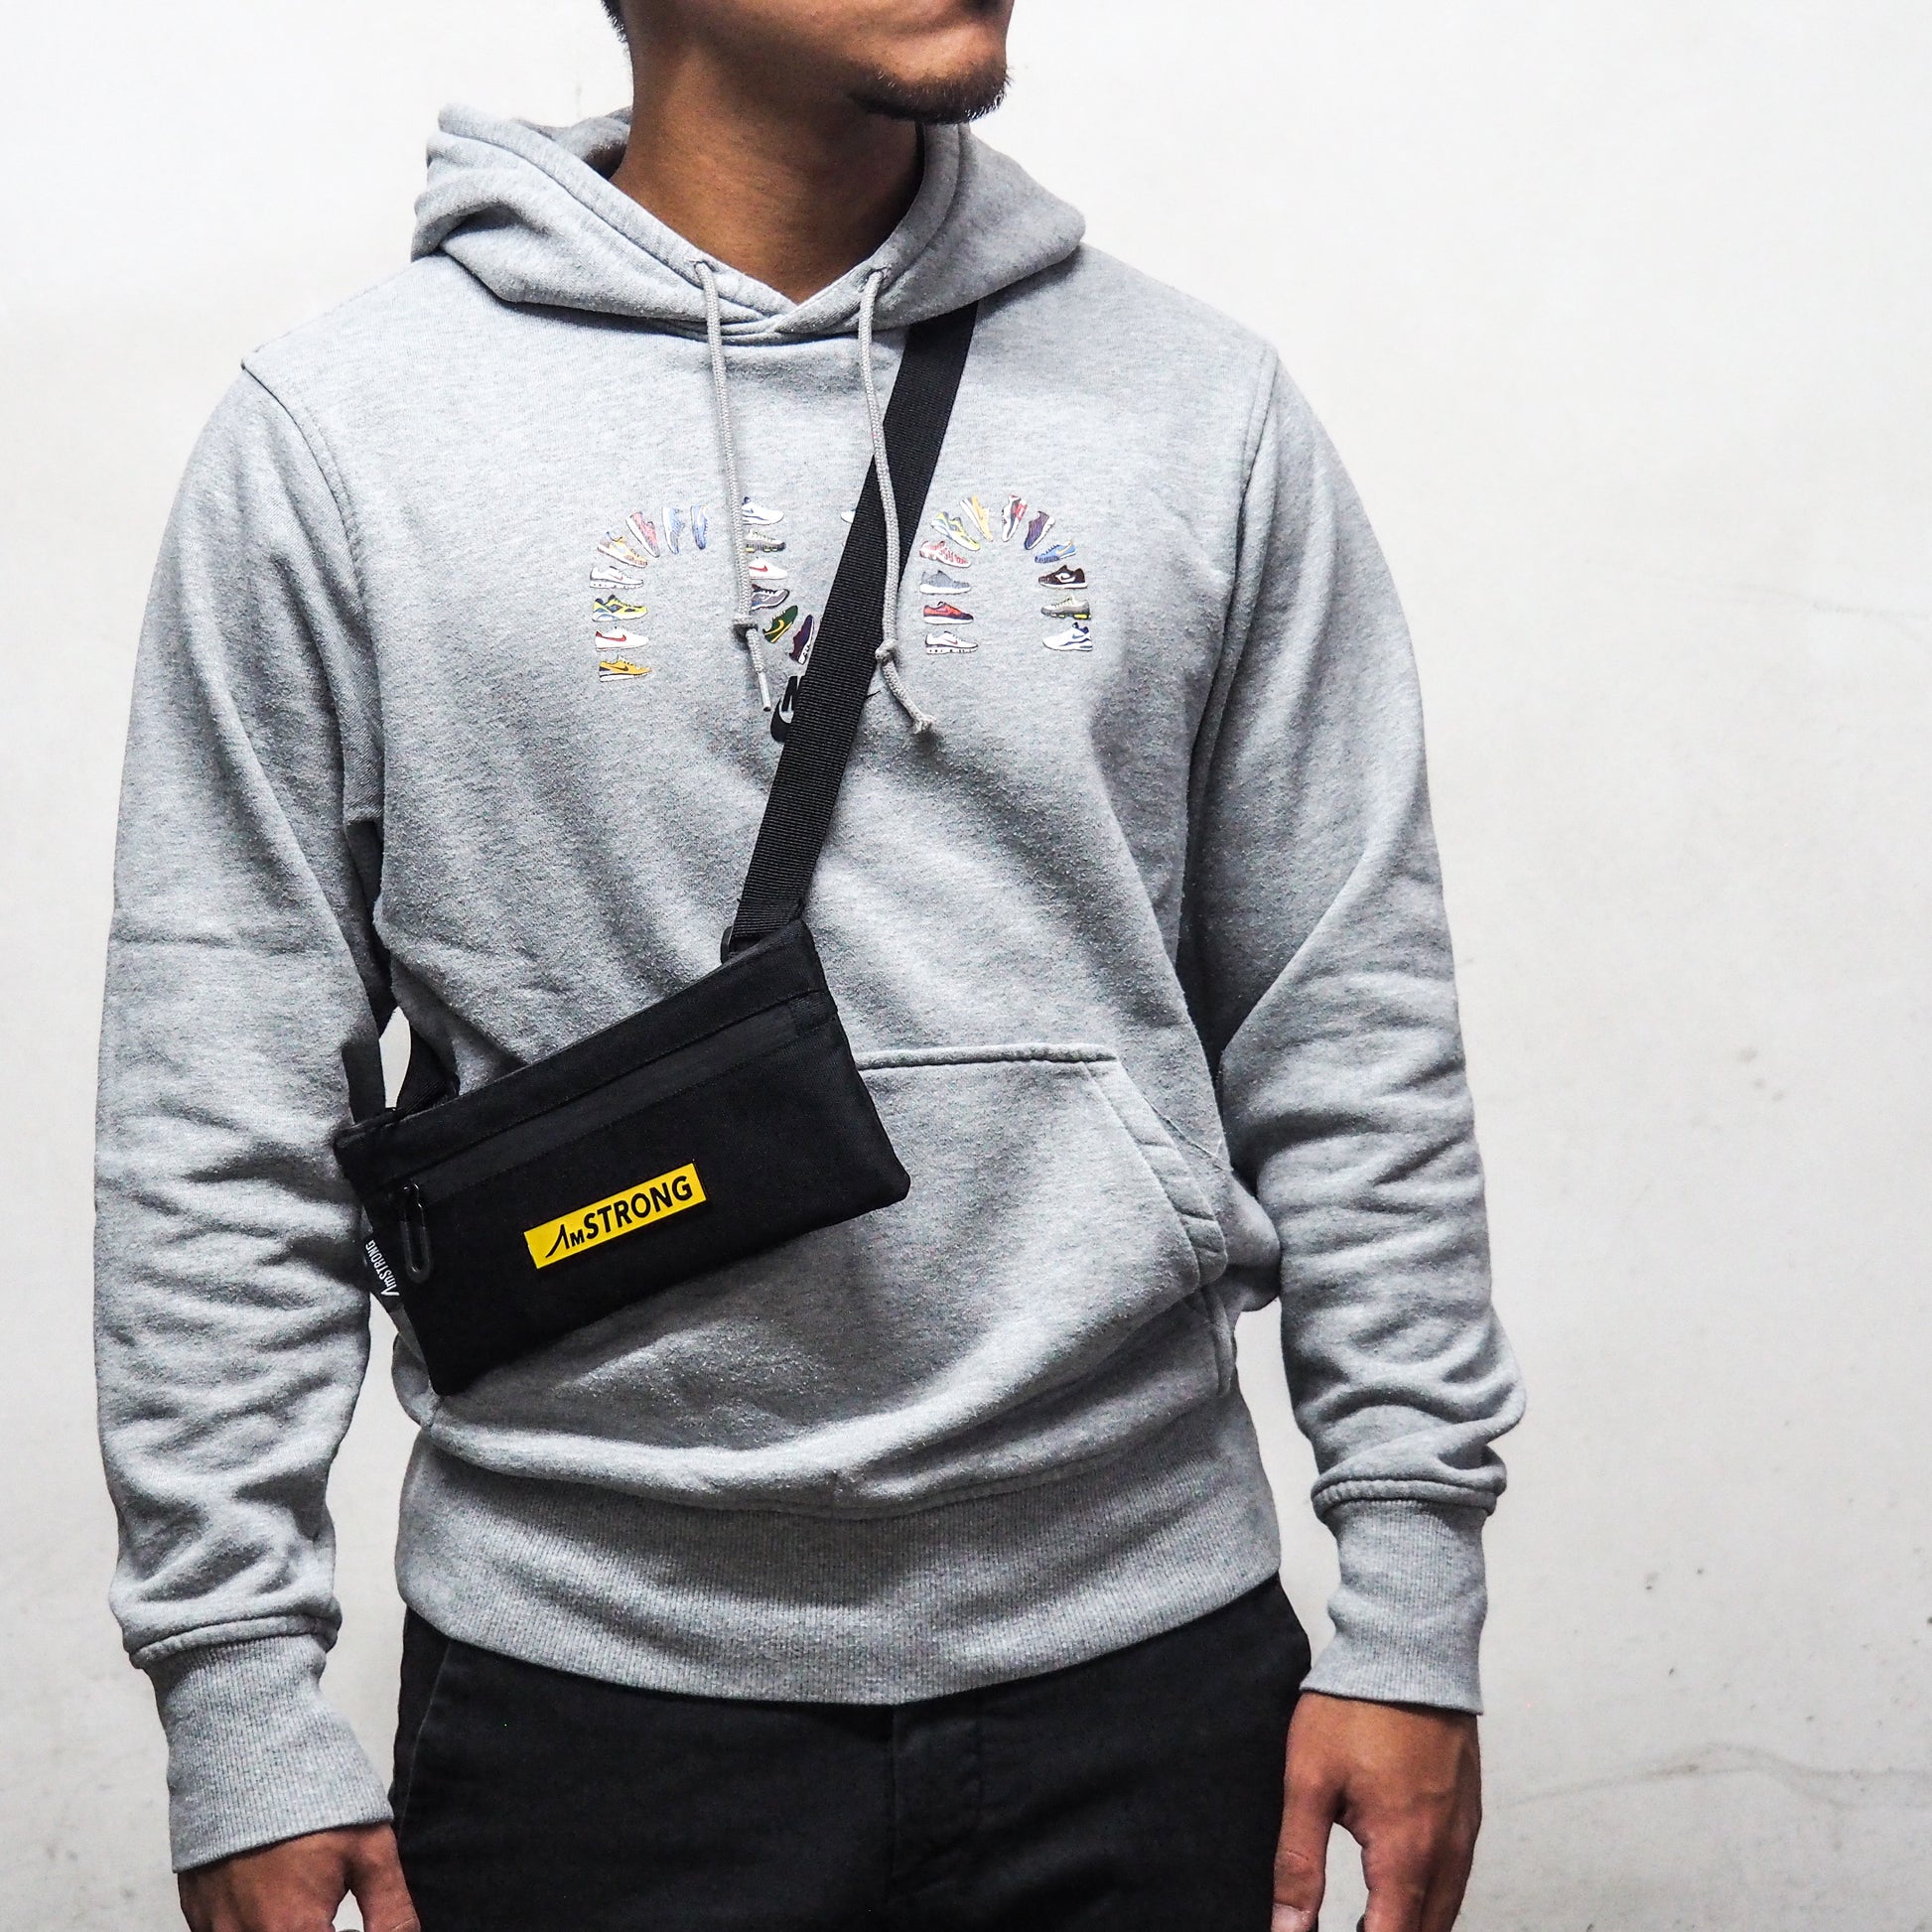  man in grey hoodie carrying a small crossbody bag